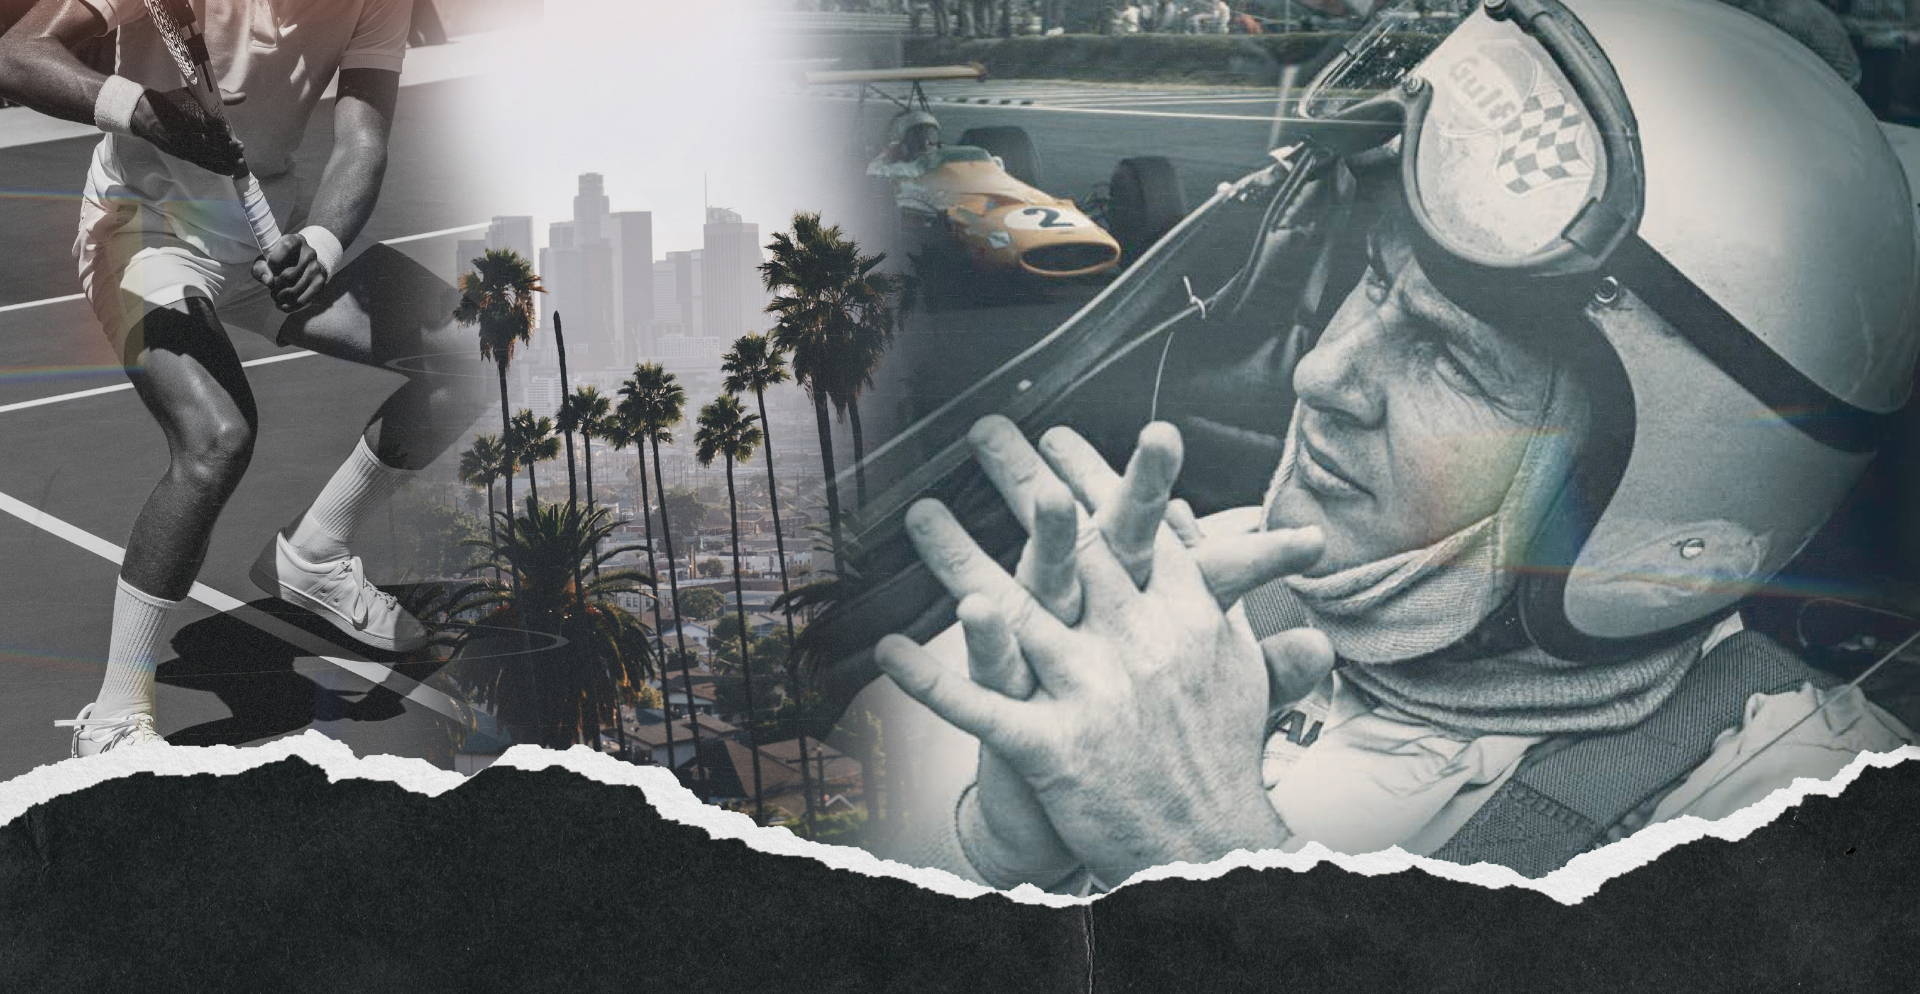 Image on left of a tennis player wearing K-Swiss sneakers. Image in the middle of palm trees and the Los Angeles skyline. Image on the right of a McLaren driver wearing racing gear.